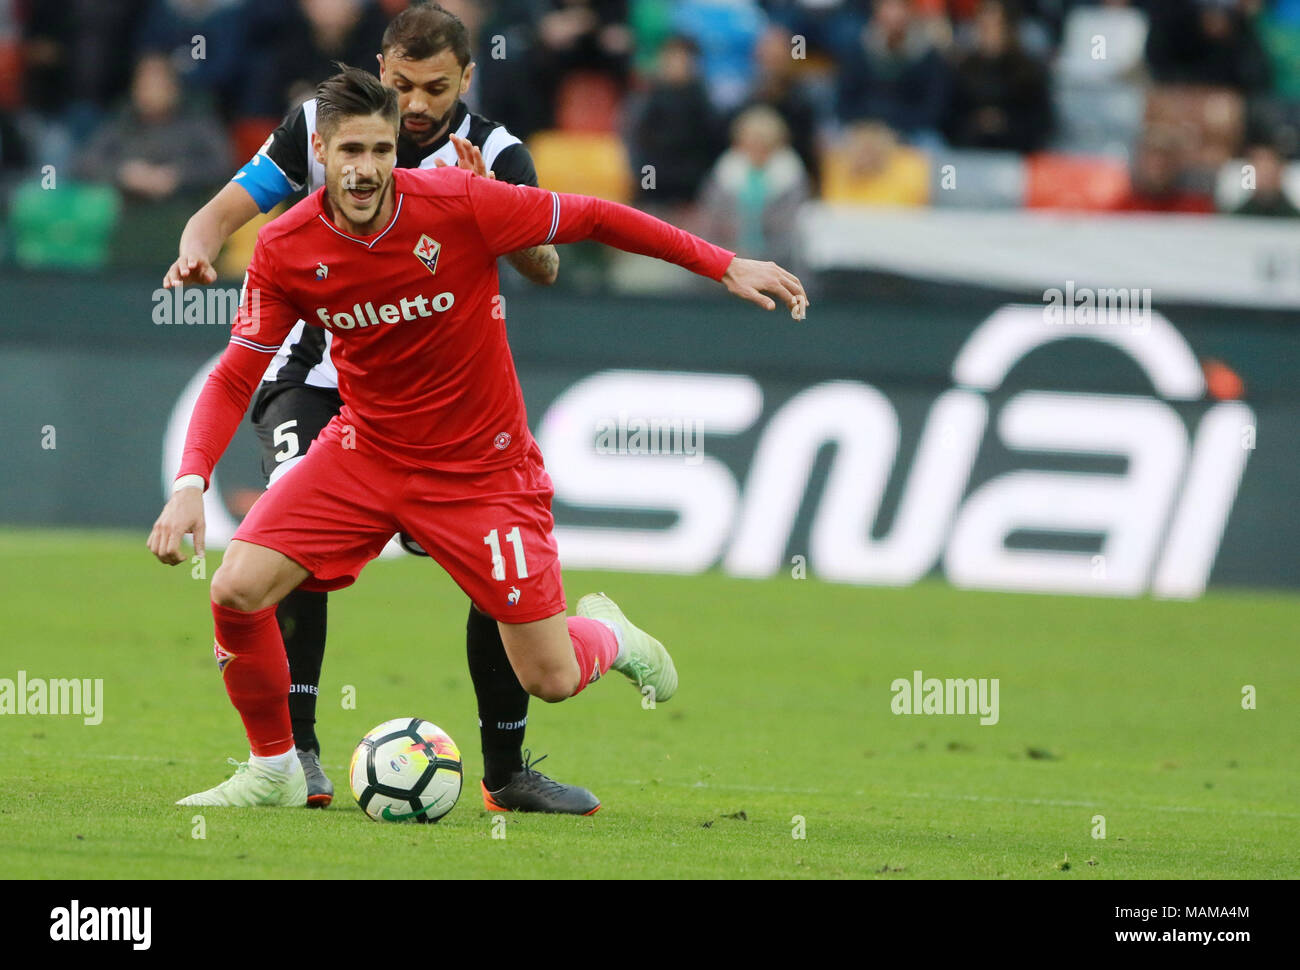 Udine, Italy. 3rd April, 2018. ITALY, Udine: Fiorentina's forward Diego Falcinelli vies with Udinese's defender Danilo Larangeira during the Serie A football match between Udinese Calcio v AC Fiorentina at Dacia Arena Stadium on 3rd April, 2018. Credit: Andrea Spinelli/Alamy Live News Stock Photo